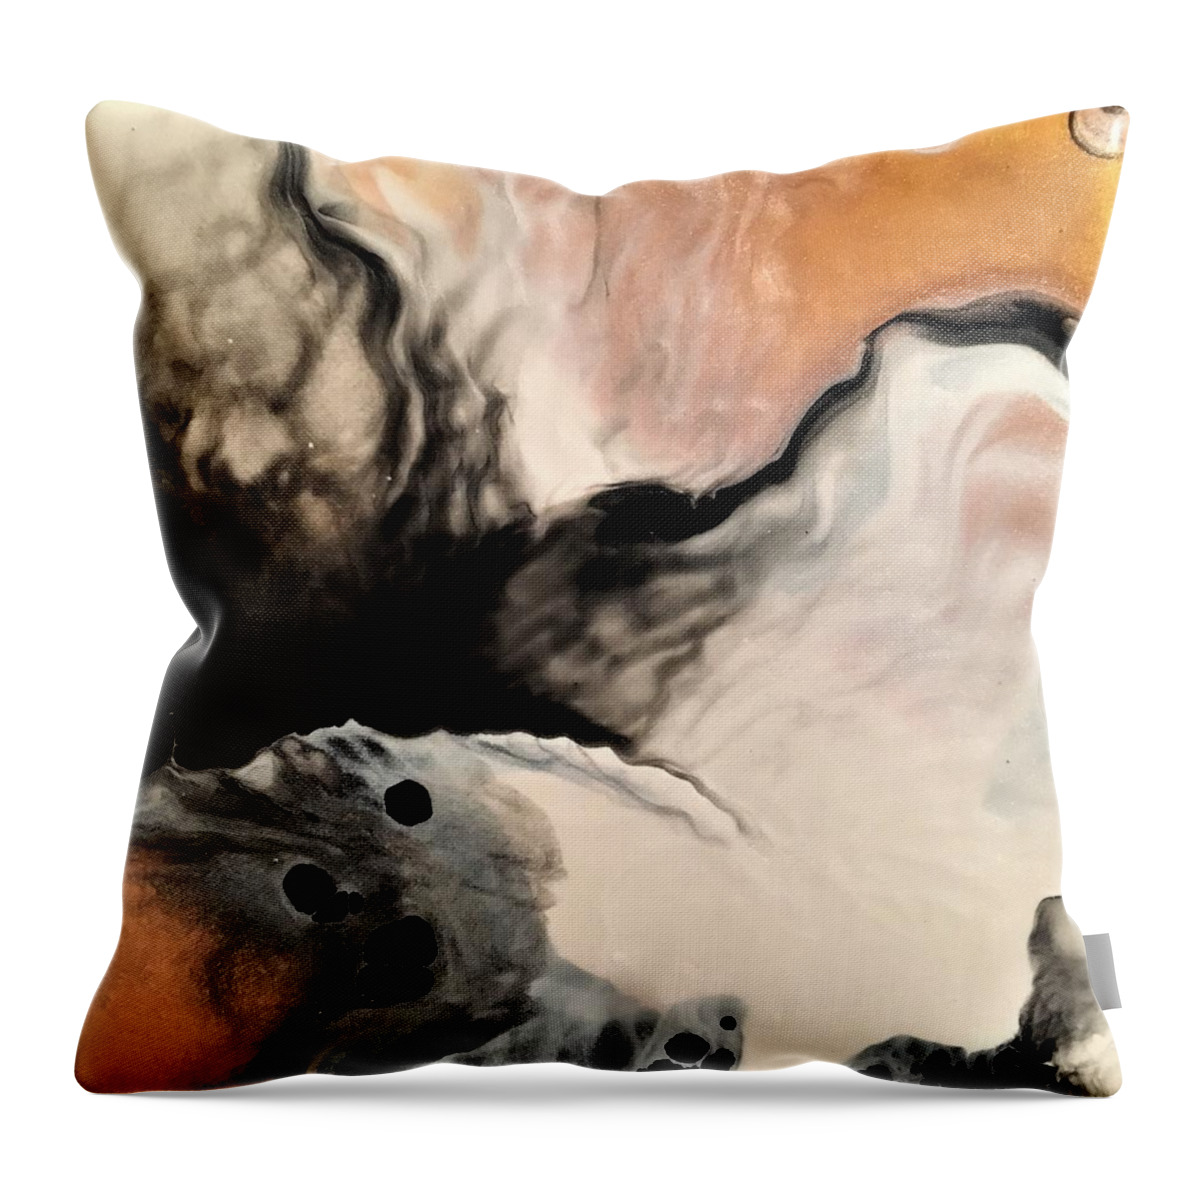 Abstract Throw Pillow featuring the painting Classic by Soraya Silvestri